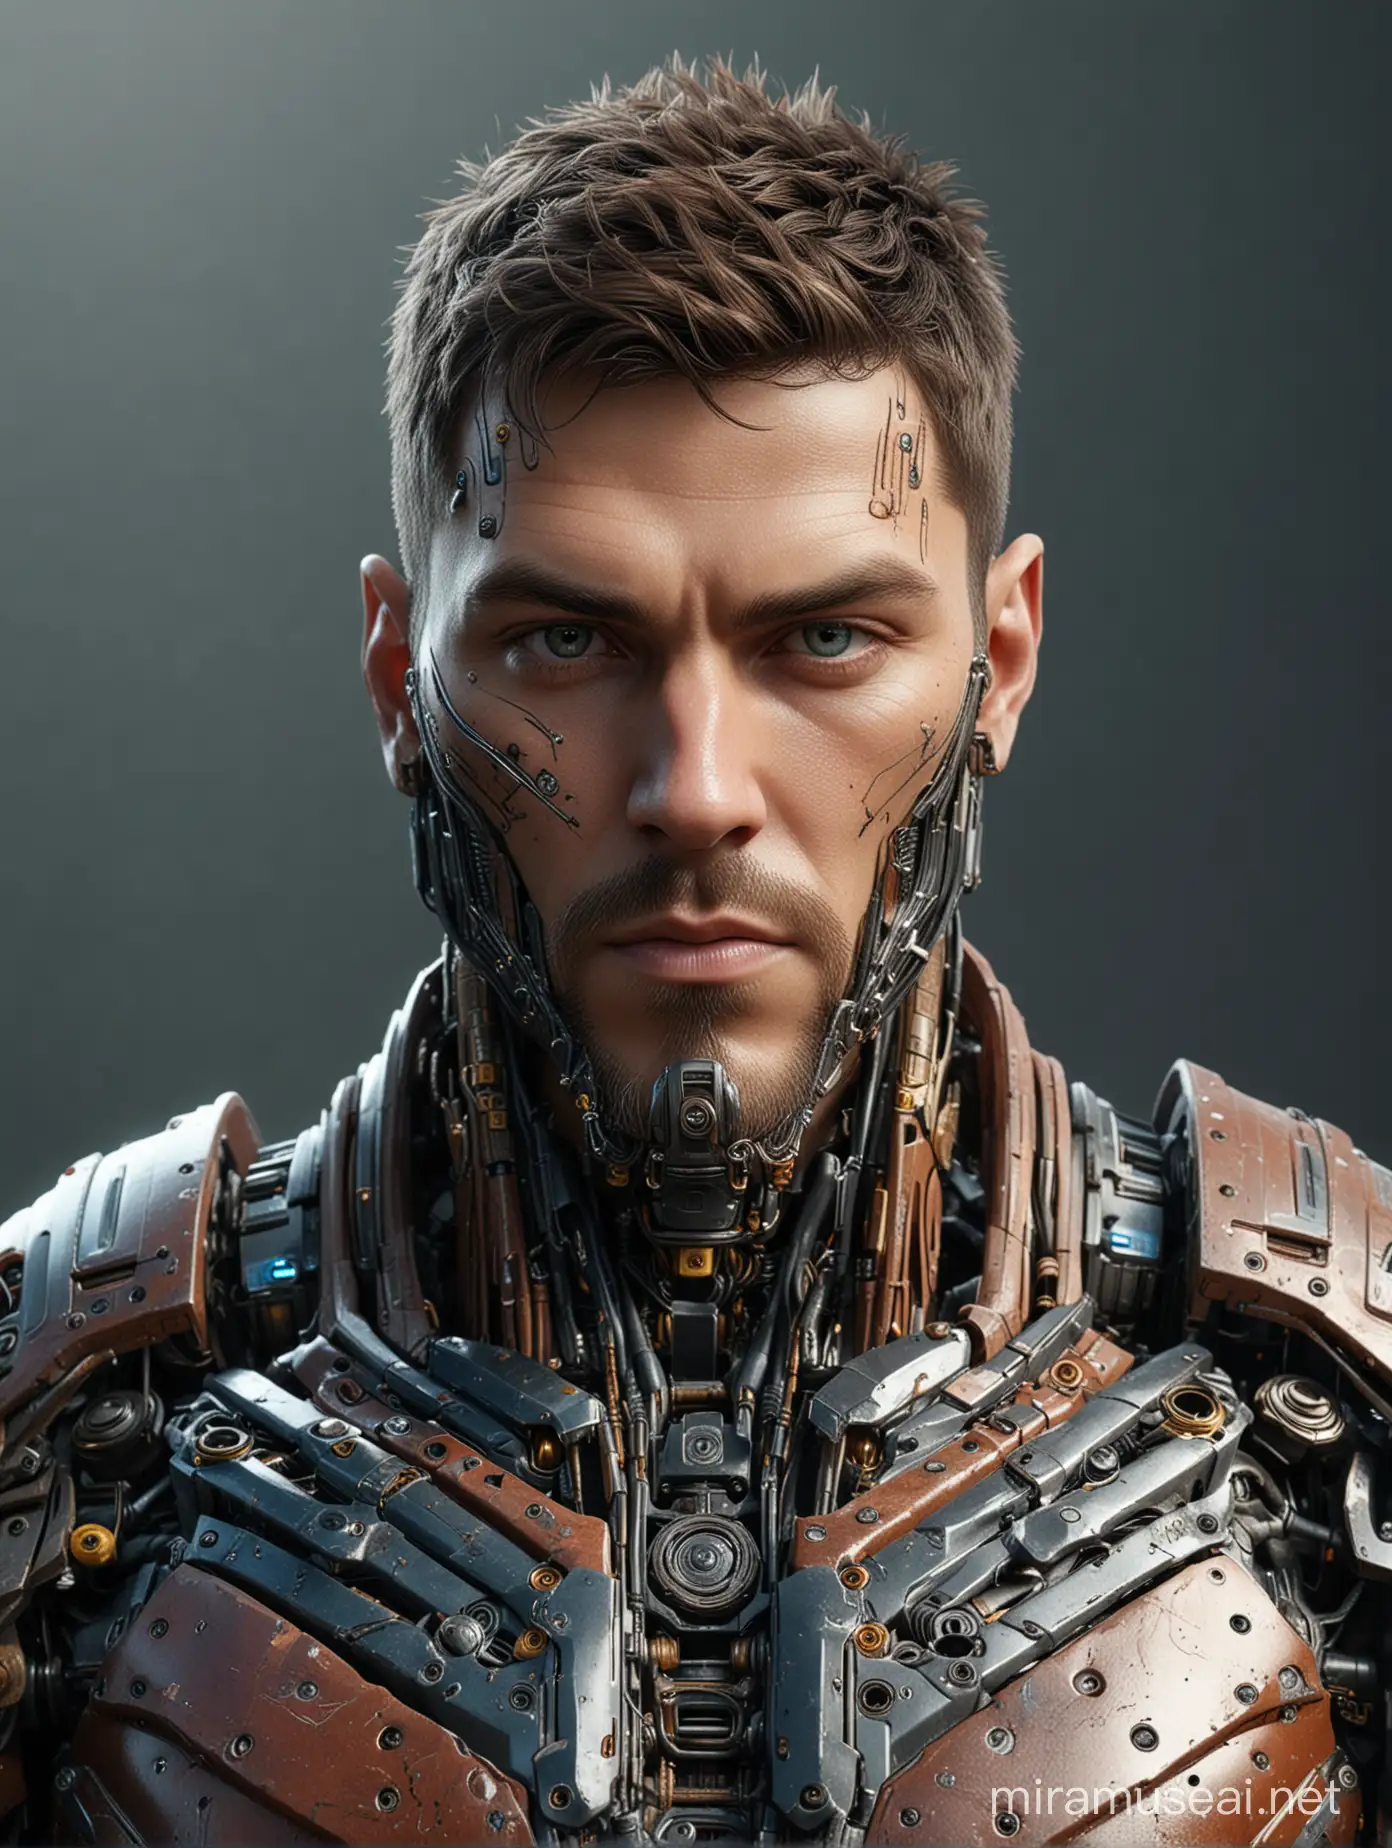 Advanced Cyborg handsome European male Warrior, Mixed Materials, Chaotic, Ceramic and Metal Materials, Colorful, Front View, POV, Symetrical, Ultra Realistic, High Extraordinary, Ultra Sharp, Award Winning Photography, Perfection, 64K, HD, Cinematography, Photorealistic, Epic Composition Unreal Engine, Exquisite Details, Intricate Cinematic, Color Grading, Ultra-Wide Angle, Depth of Field, Hyper-Detailed, Hyper-Realistic, Beautifully Colored, Insane Detail,